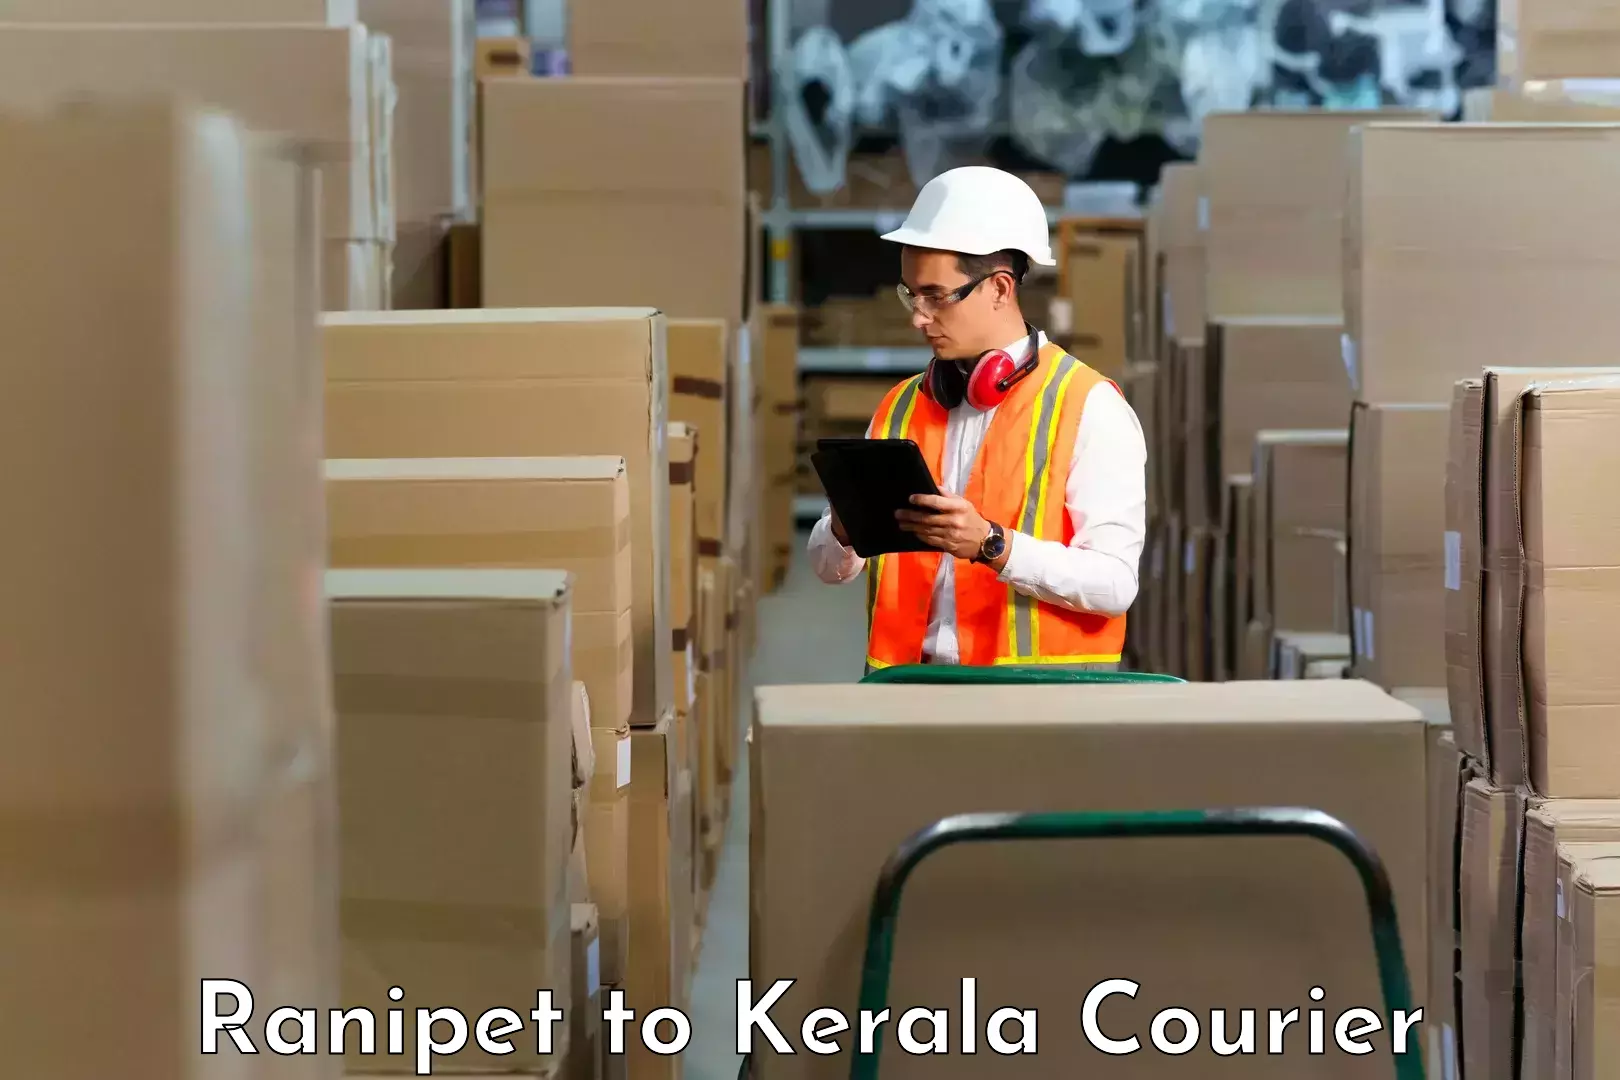 Courier service efficiency Ranipet to Pala